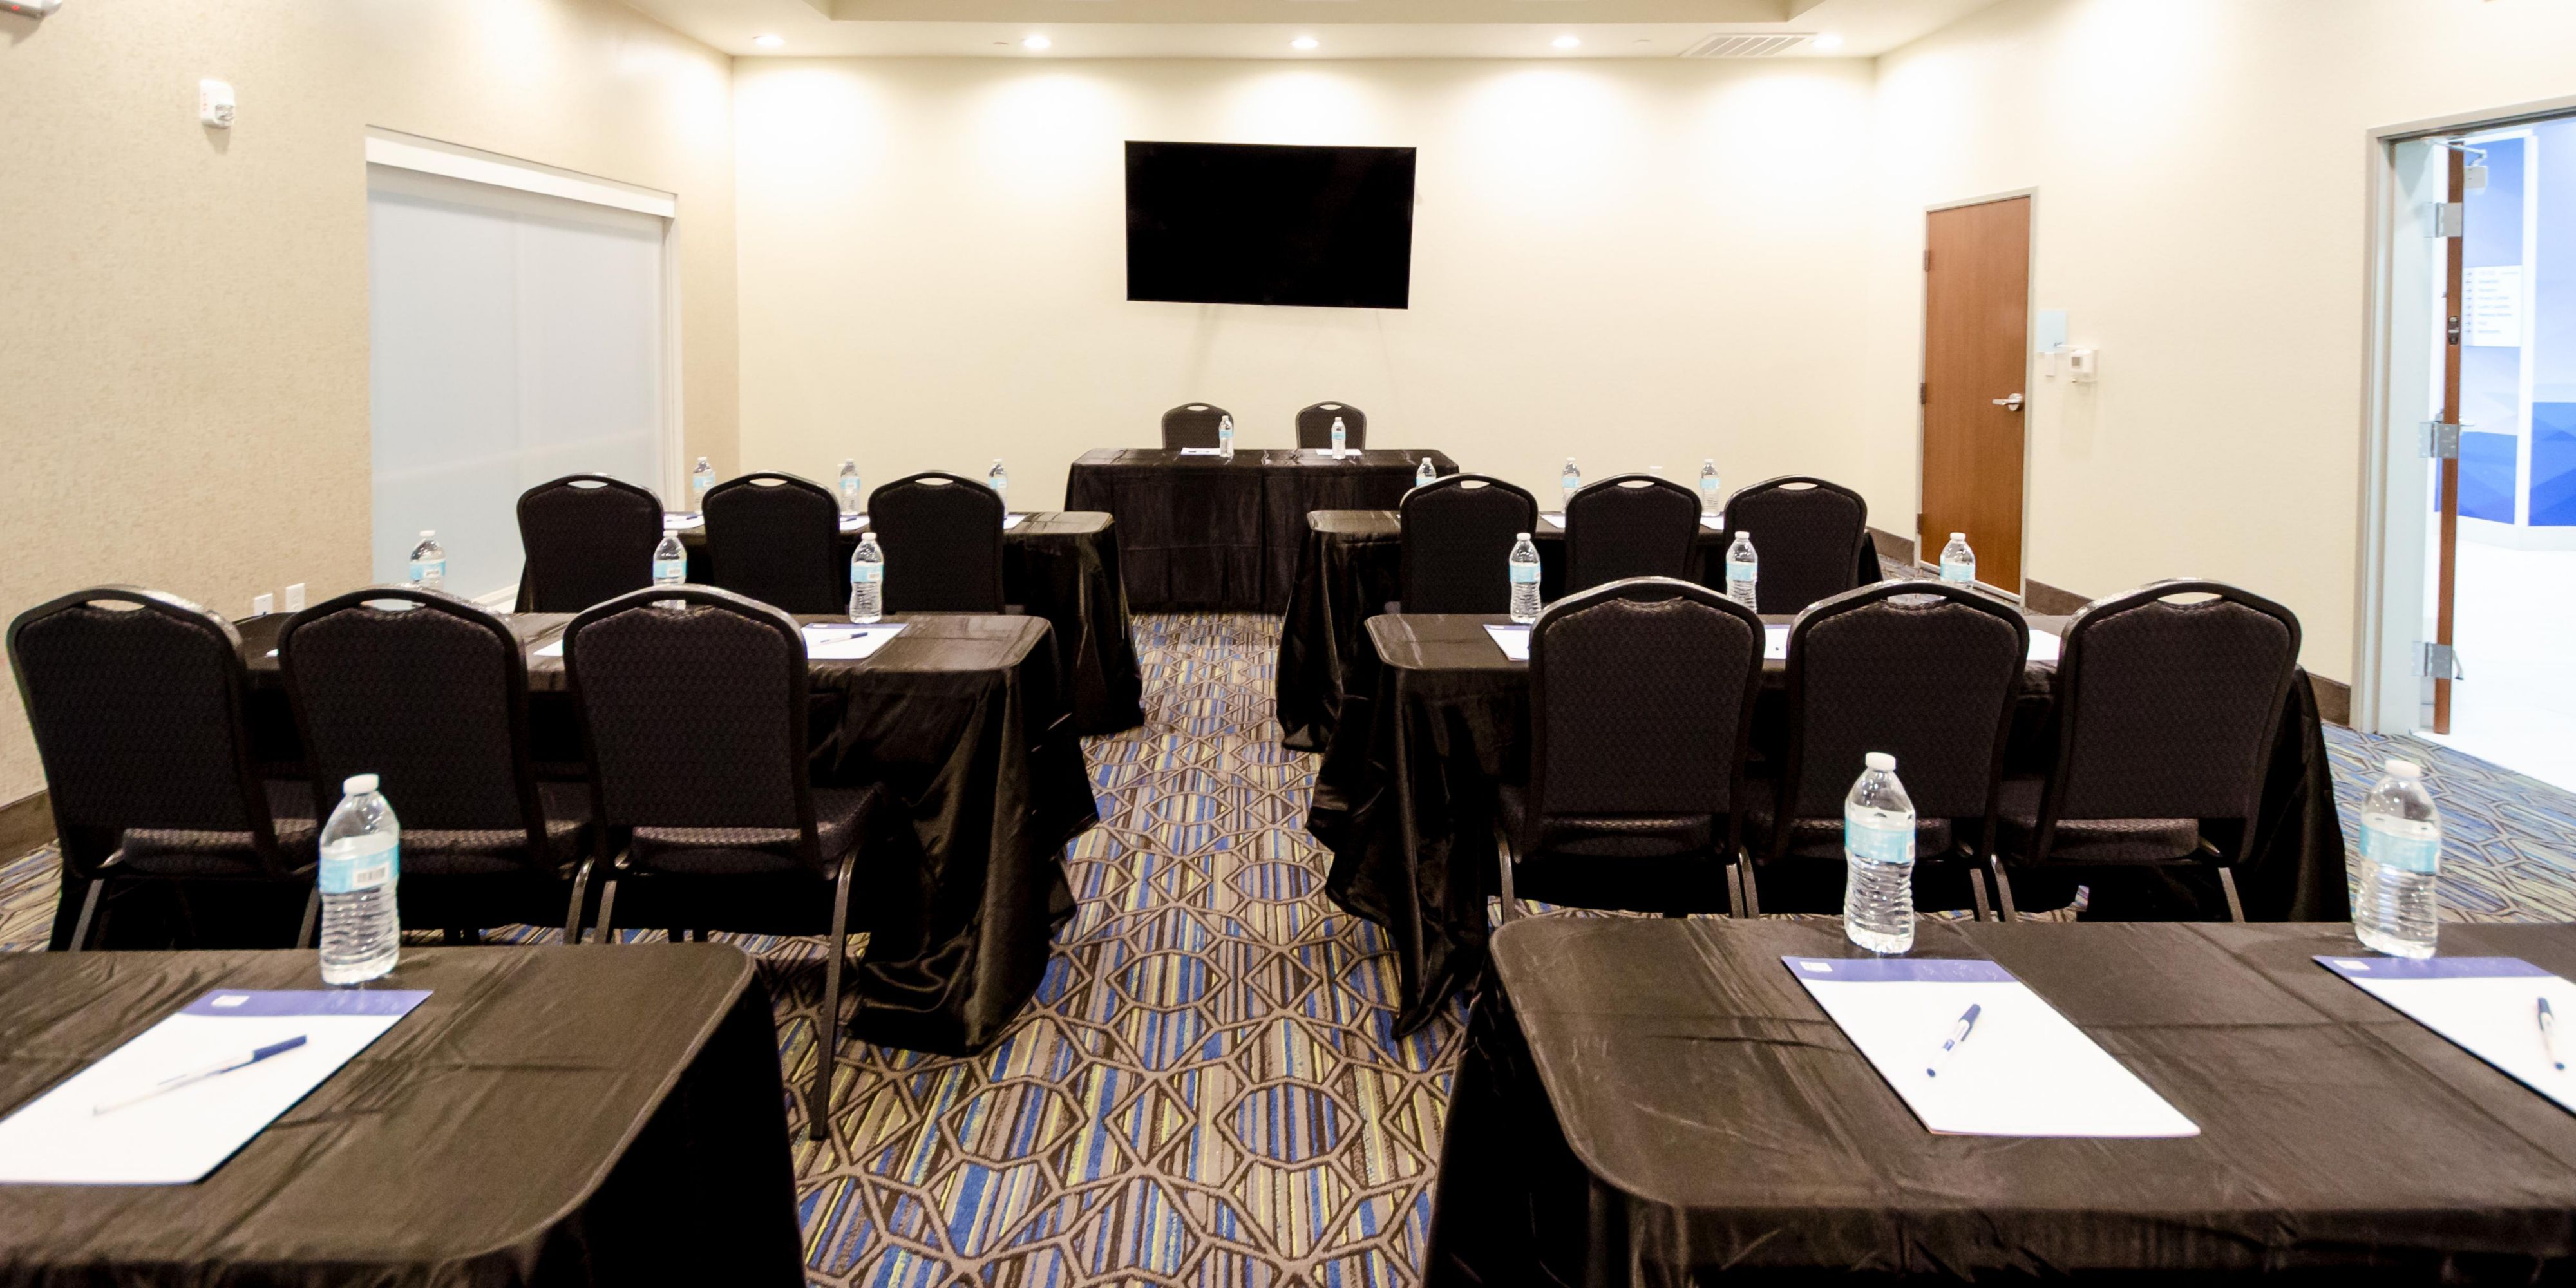 Host your “Taylor Made” meeting, training, and social gathering in our 1206 sq ft flexible event space. Our large meeting room can accommodate up to 100 guests and can be divided into two smaller rooms with a noise-canceling wall. Let our team assist with catering and 72” HD televisions, and sound system, to make your event a success.